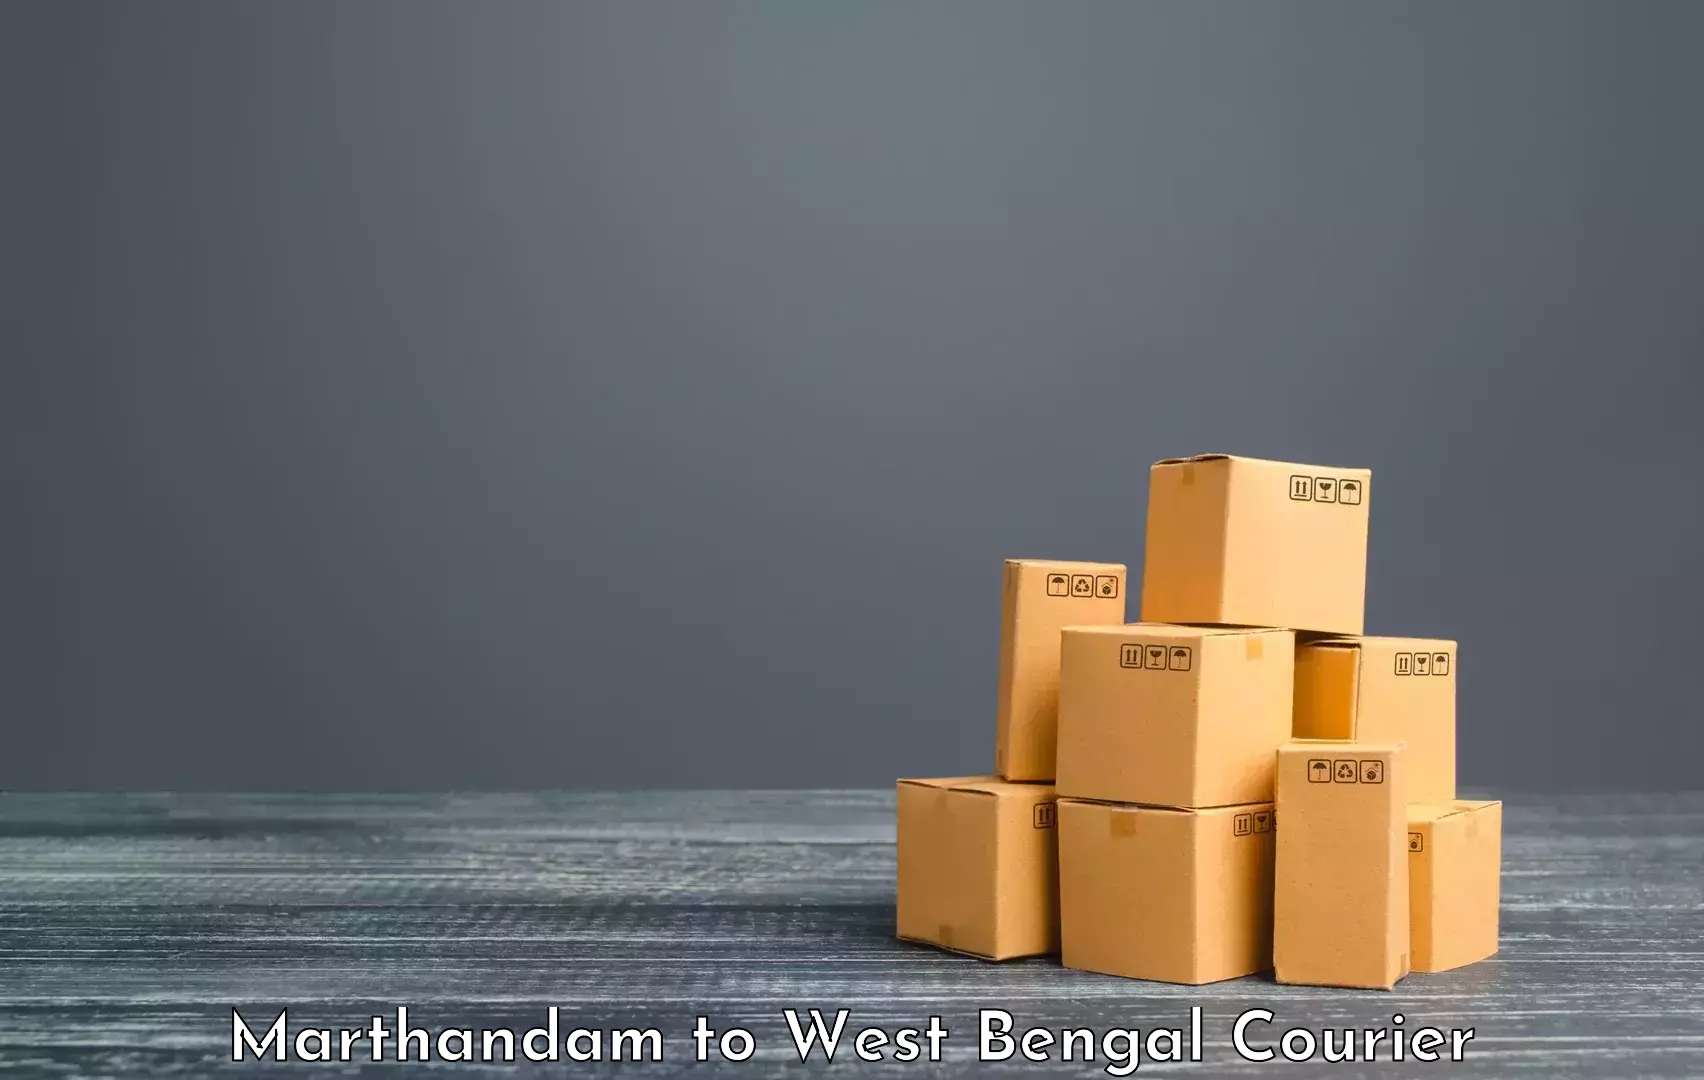 Baggage transport network Marthandam to West Bengal